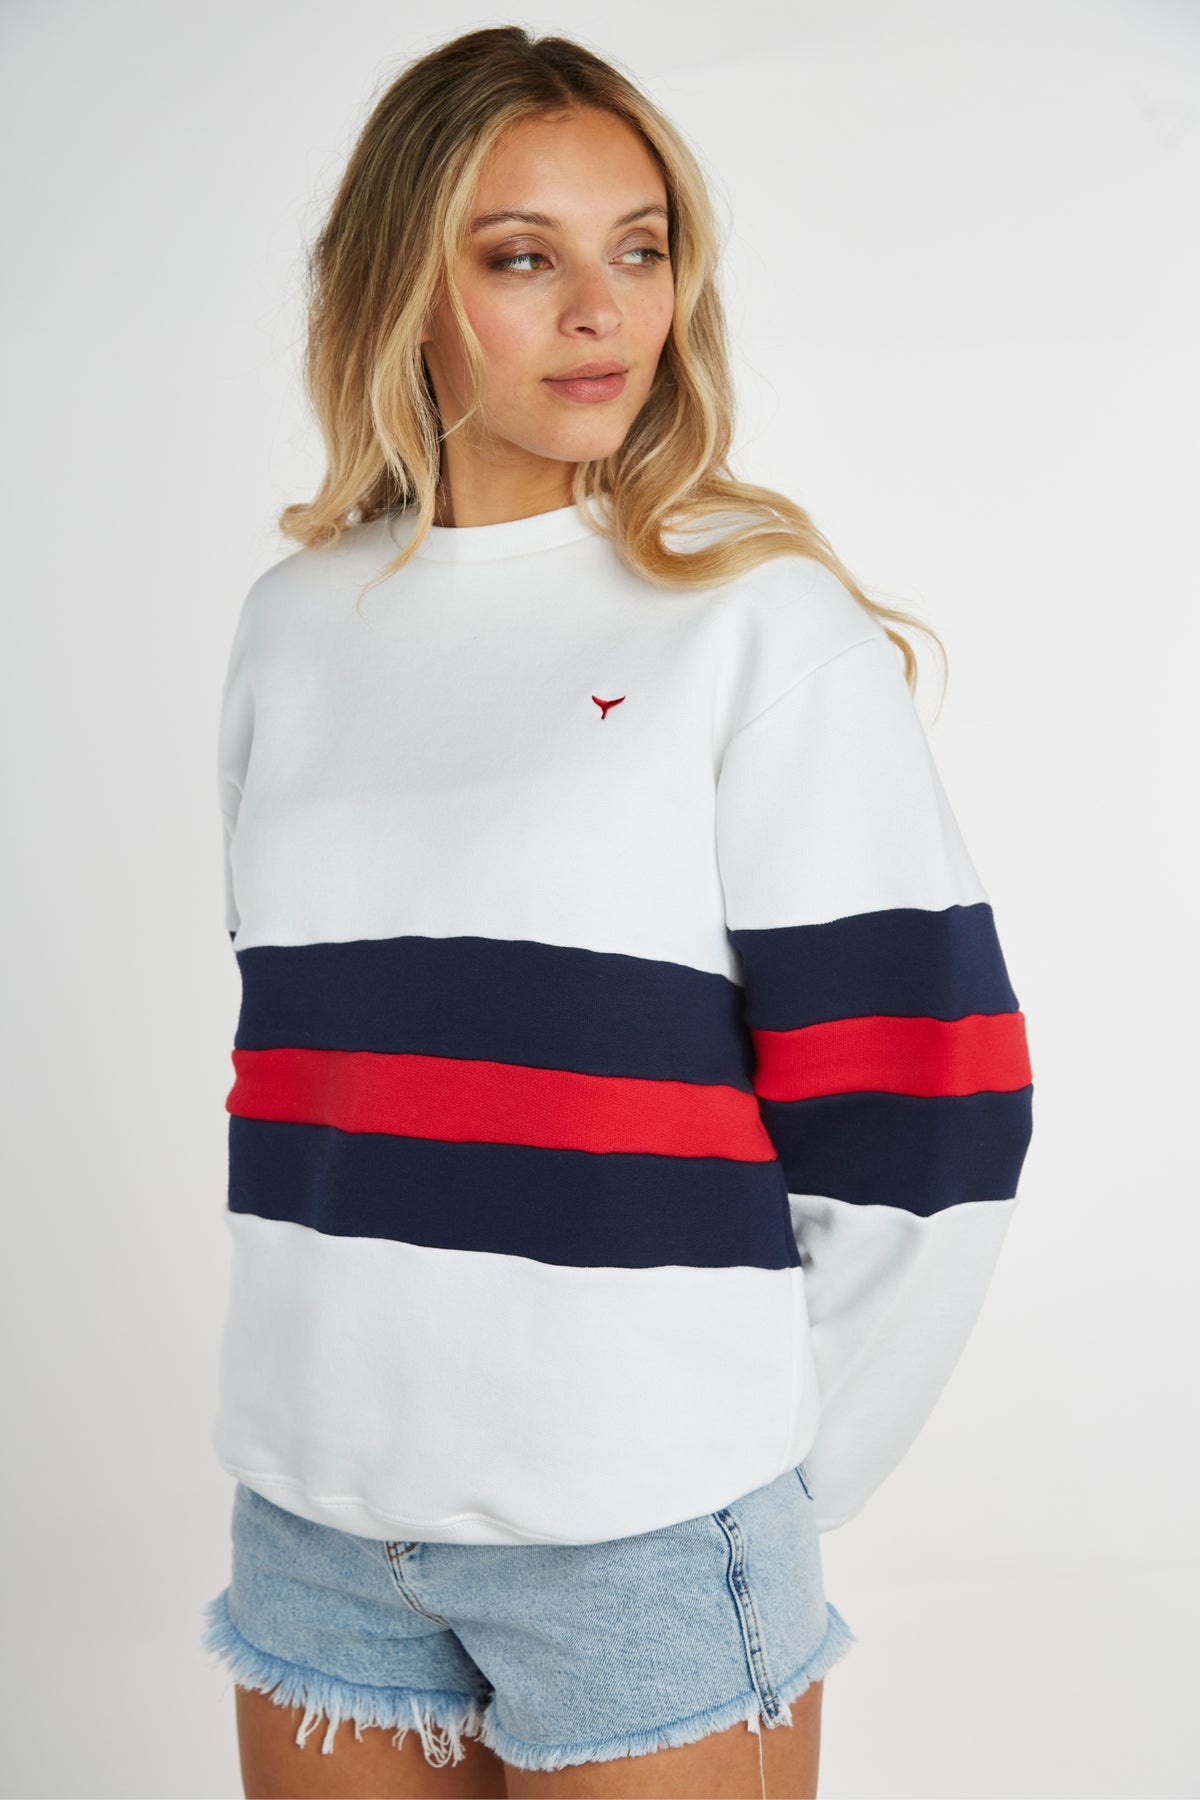 Sowerby Unisex Sweatshirt - White - Whale Of A Time Clothing